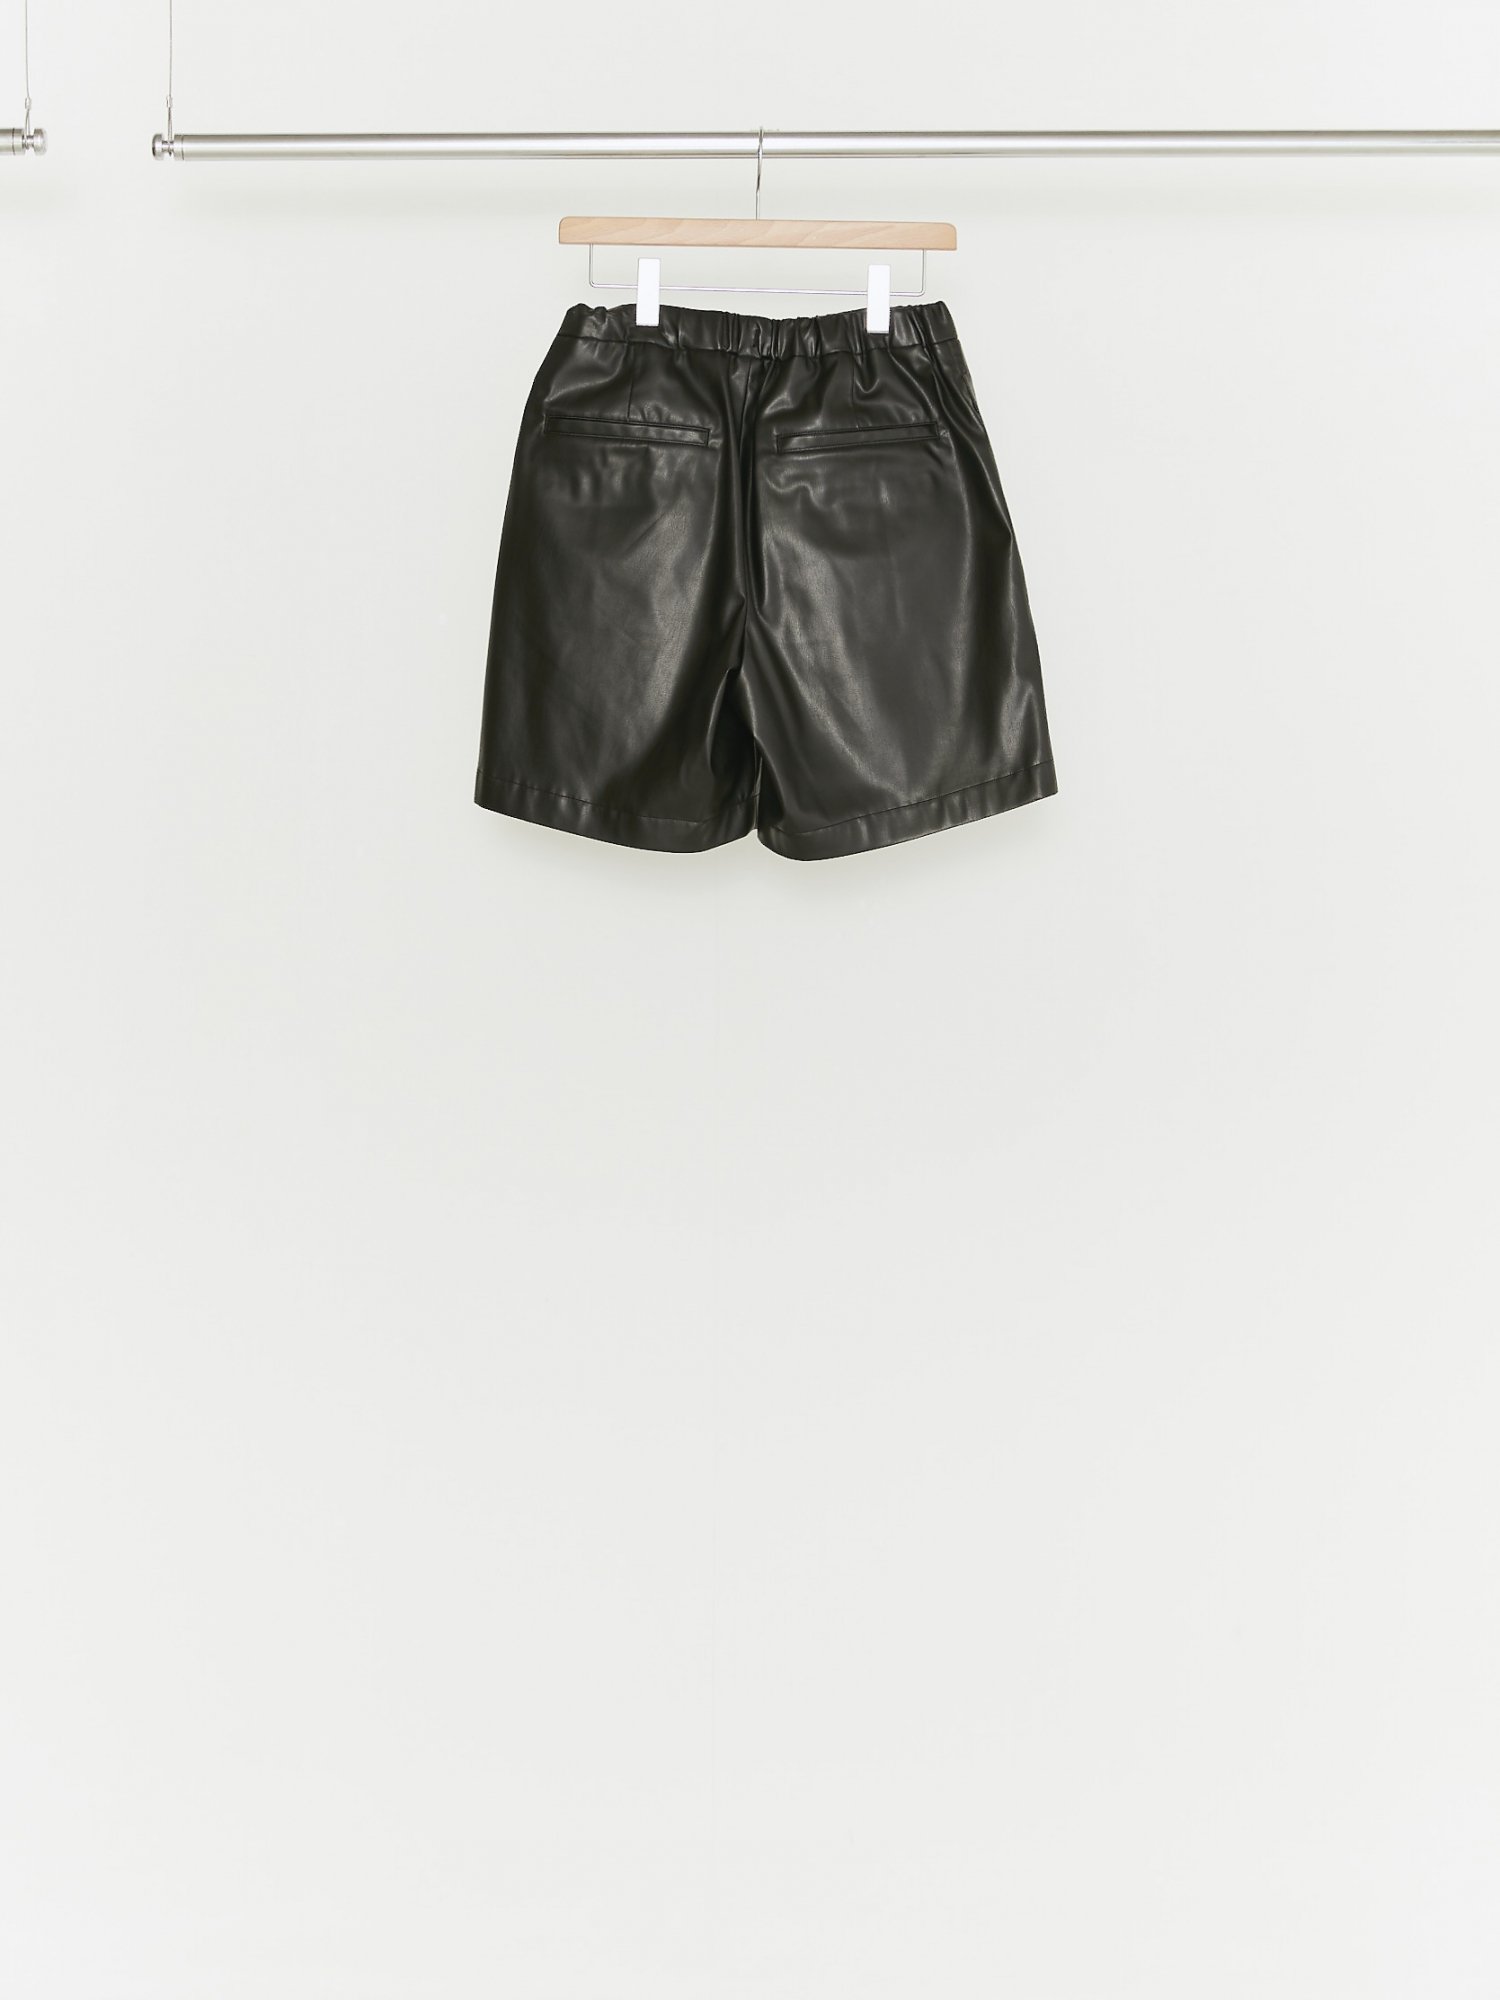 ALLEGE<br />Synthetic Leather Shorts / BLACK<img class='new_mark_img2' src='https://img.shop-pro.jp/img/new/icons14.gif' style='border:none;display:inline;margin:0px;padding:0px;width:auto;' />